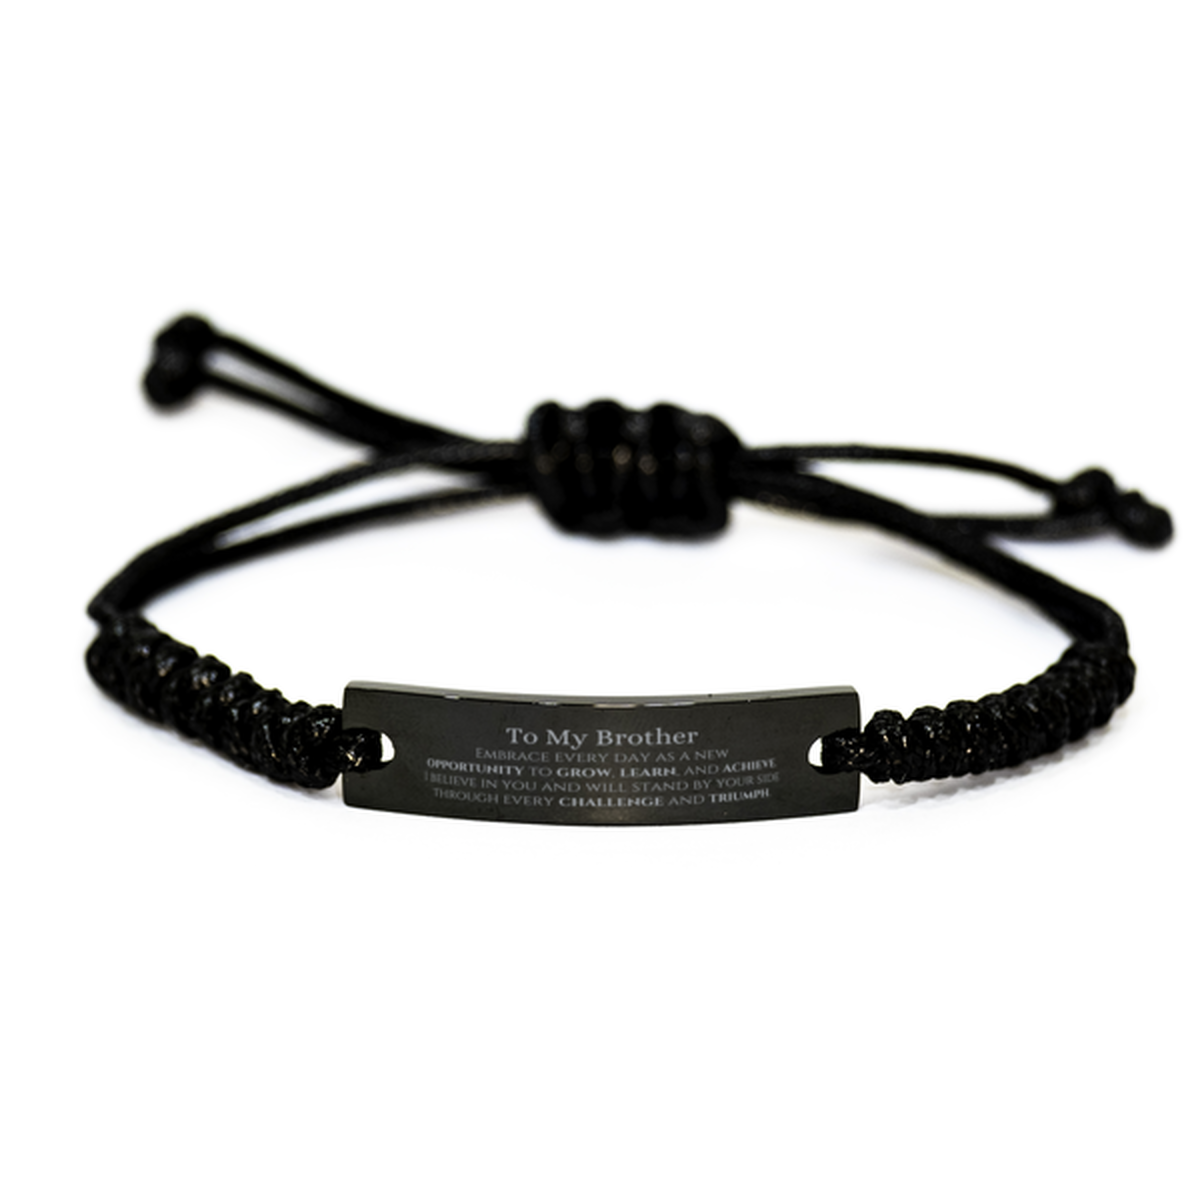 To My Brother Gifts, I believe in you and will stand by your side, Inspirational Black Rope Bracelet For Brother, Birthday Christmas Motivational Brother Gifts